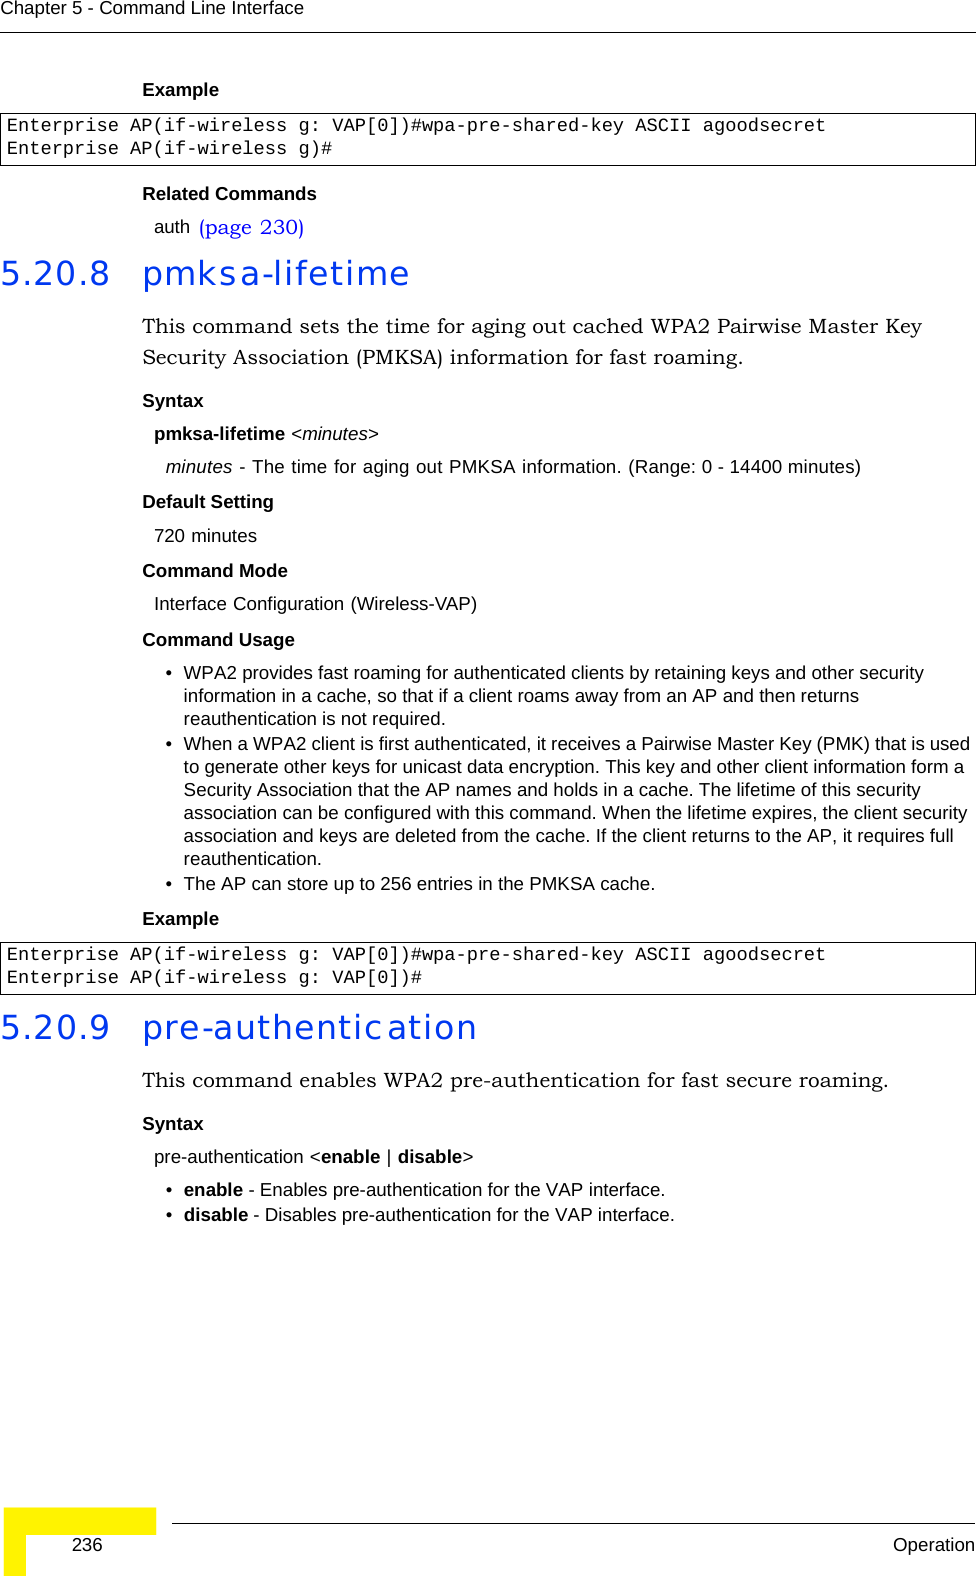  236 OperationChapter 5 - Command Line InterfaceExample Related Commandsauth (page 230)5.20.8 pmksa-lifetime This command sets the time for aging out cached WPA2 Pairwise Master Key Security Association (PMKSA) information for fast roaming.Syntaxpmksa-lifetime &lt;minutes&gt;minutes - The time for aging out PMKSA information. (Range: 0 - 14400 minutes)Default Setting 720 minutesCommand Mode Interface Configuration (Wireless-VAP)Command Usage • WPA2 provides fast roaming for authenticated clients by retaining keys and other security information in a cache, so that if a client roams away from an AP and then returns reauthentication is not required. • When a WPA2 client is first authenticated, it receives a Pairwise Master Key (PMK) that is used to generate other keys for unicast data encryption. This key and other client information form a Security Association that the AP names and holds in a cache. The lifetime of this security association can be configured with this command. When the lifetime expires, the client security association and keys are deleted from the cache. If the client returns to the AP, it requires full reauthentication.• The AP can store up to 256 entries in the PMKSA cache. Example 5.20.9 pre-authentication This command enables WPA2 pre-authentication for fast secure roaming.Syntaxpre-authentication &lt;enable | disable&gt;•enable - Enables pre-authentication for the VAP interface. •disable - Disables pre-authentication for the VAP interface.Enterprise AP(if-wireless g: VAP[0])#wpa-pre-shared-key ASCII agoodsecretEnterprise AP(if-wireless g)#Enterprise AP(if-wireless g: VAP[0])#wpa-pre-shared-key ASCII agoodsecretEnterprise AP(if-wireless g: VAP[0])#